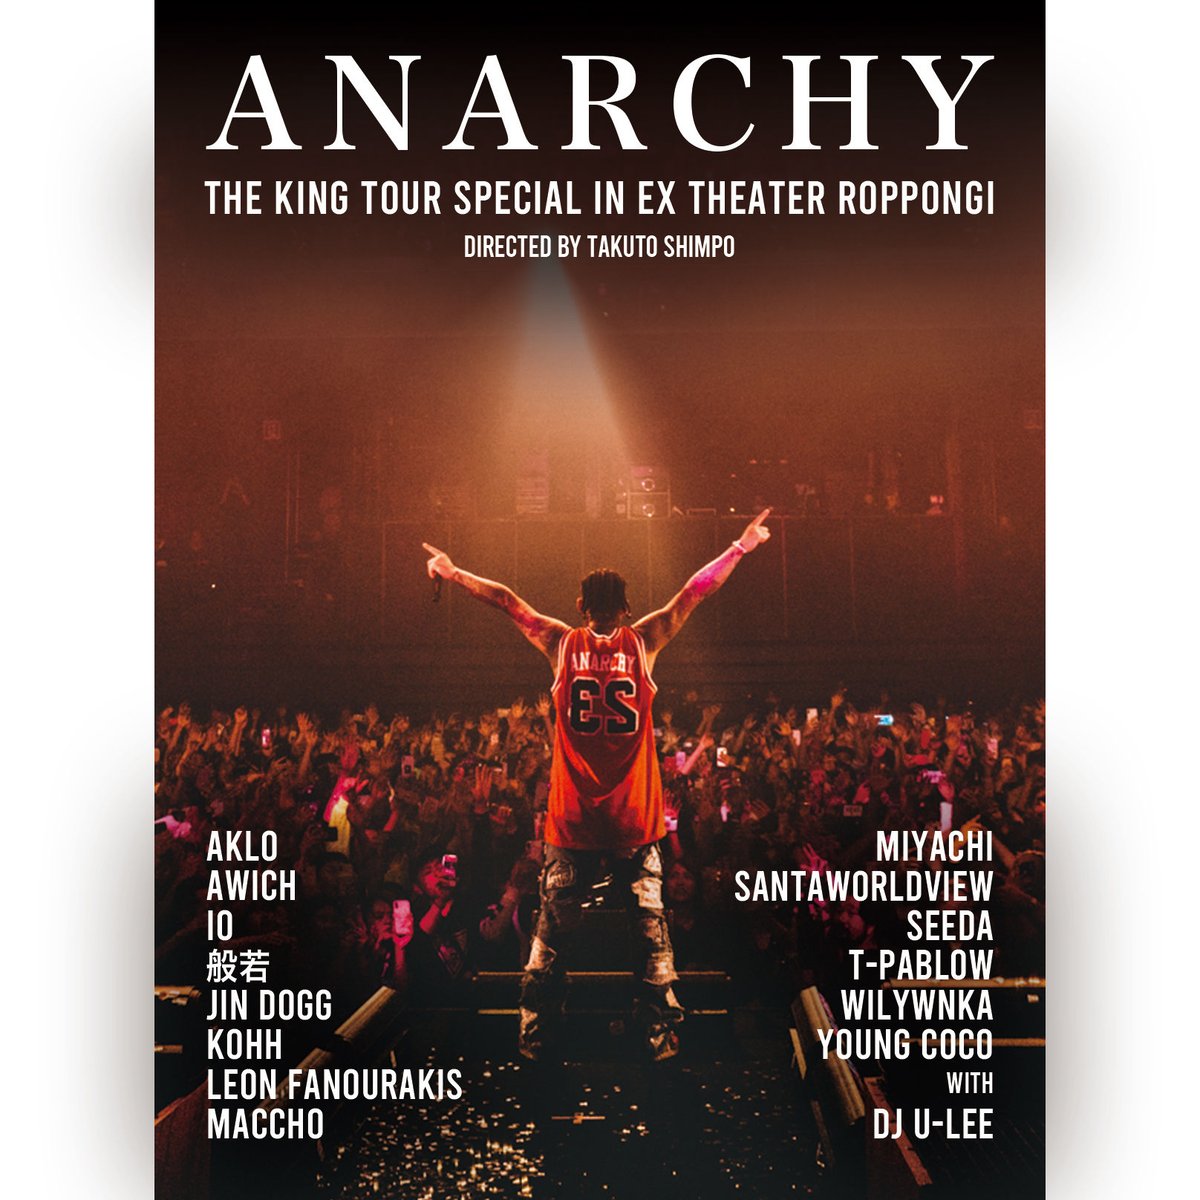 ［Blu-ray / 通常盤］ ANARCHY - THE KING TOUR SPECIAL in EX THEATER ROPPONGI